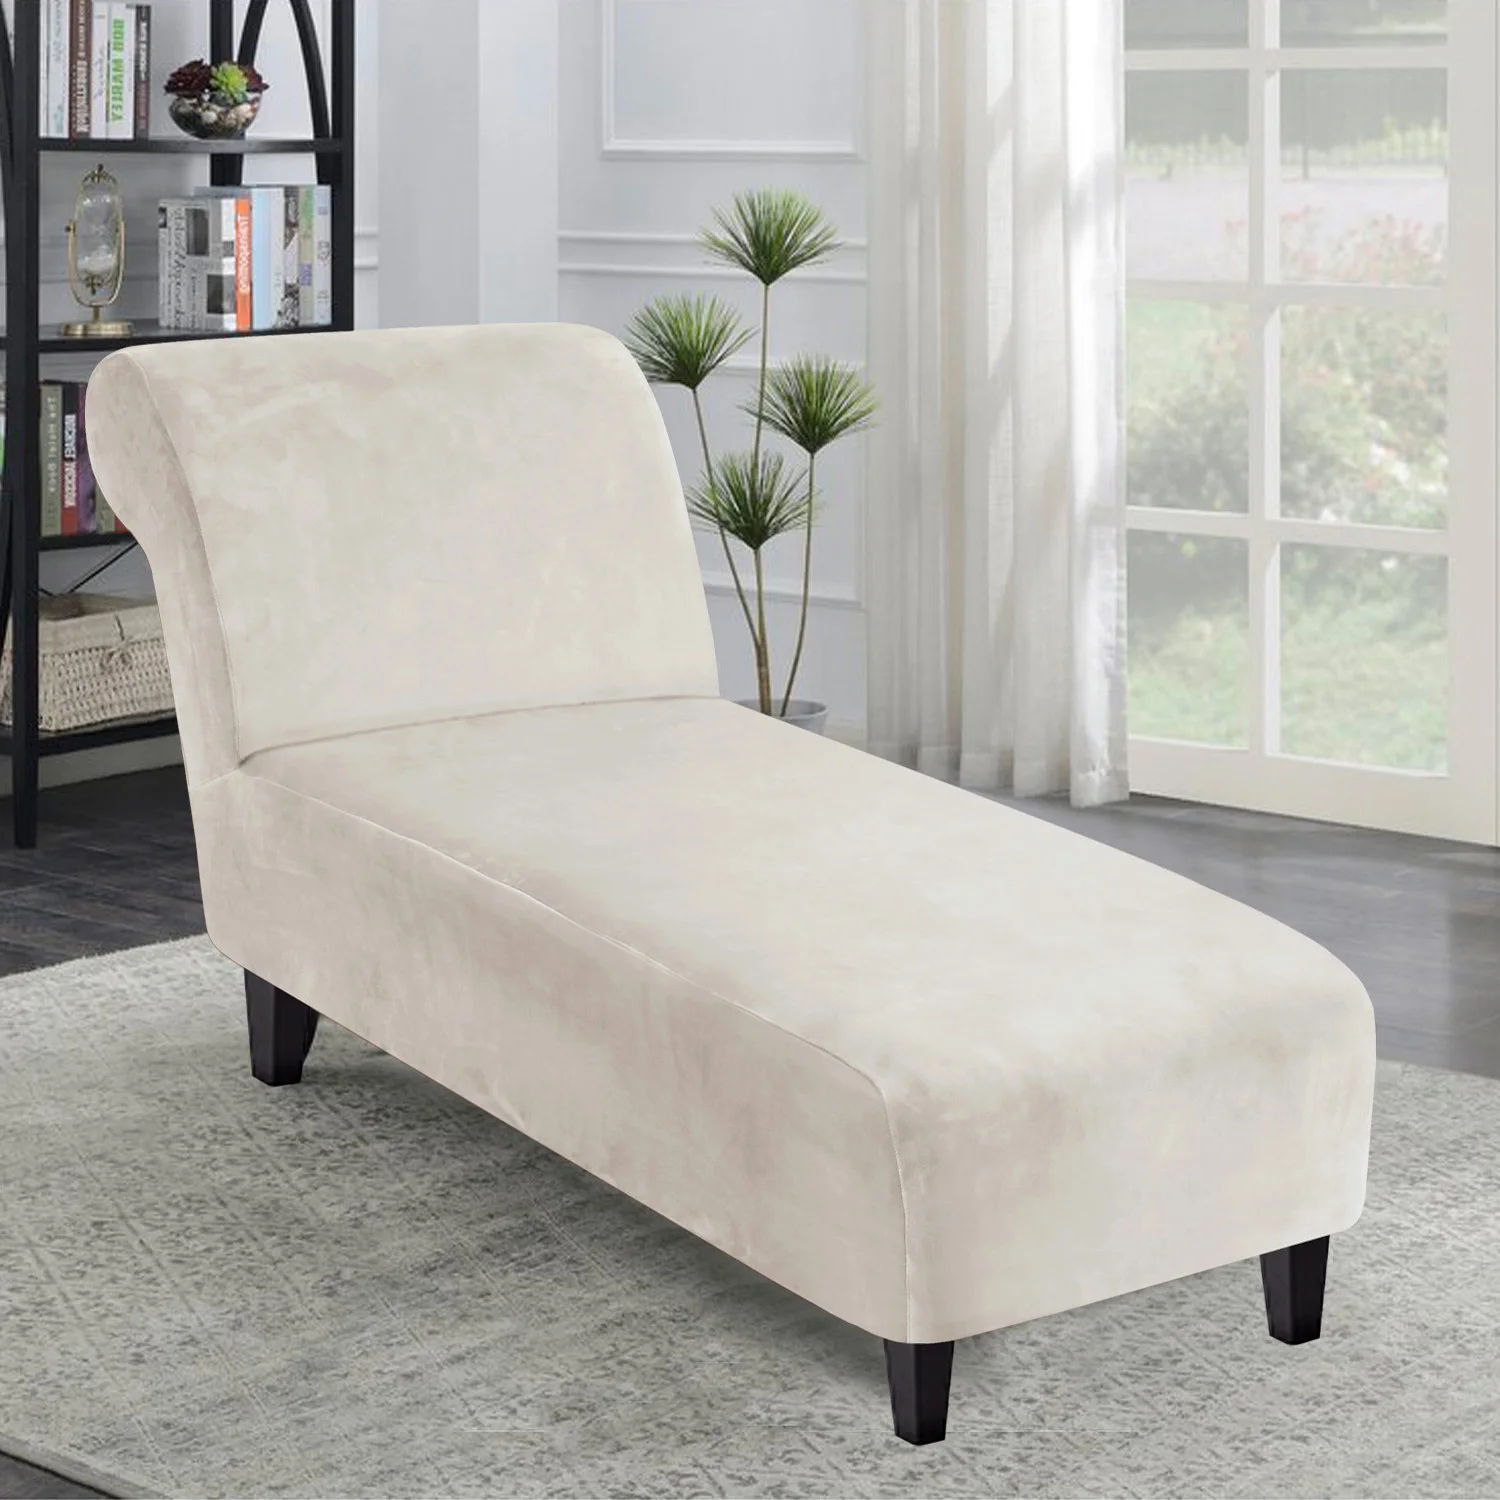 Velvet Armless Chaise Longue Chair Cover Stretch Chaise Lounge Slipcover Sofa Slipcover Lady Recliner Covers for Living Room